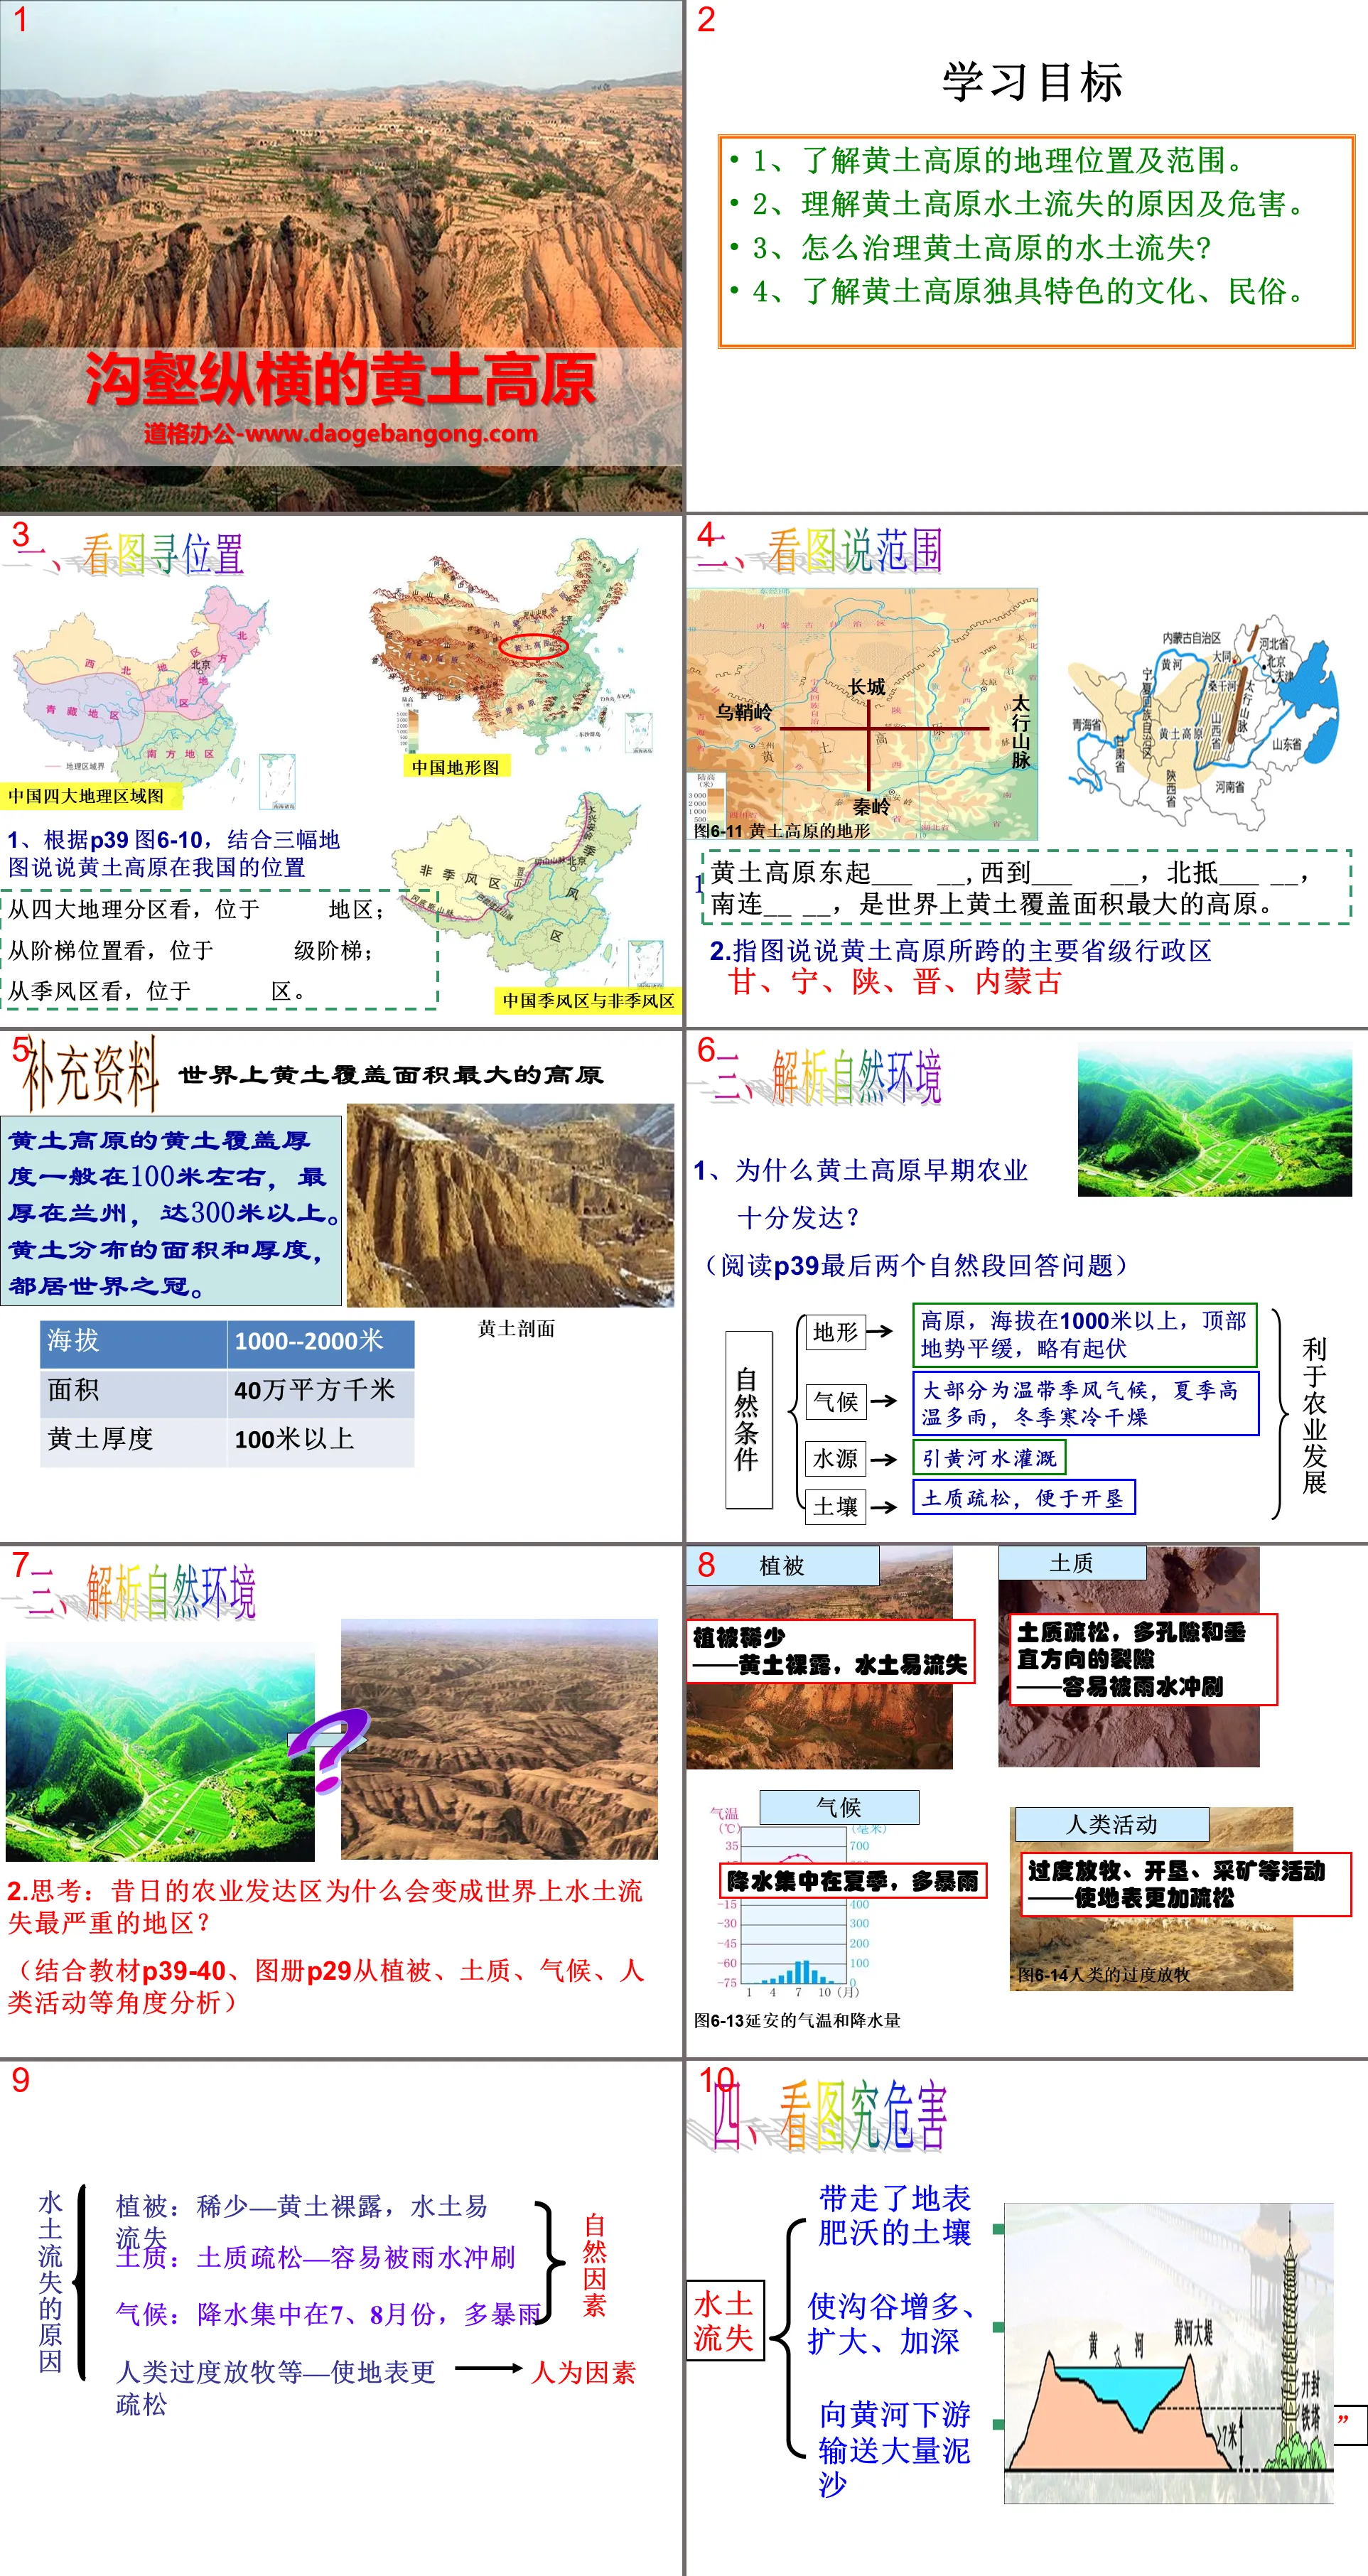 "The Loess Plateau with crisscrossed ravines" Water and soil support one person PPT